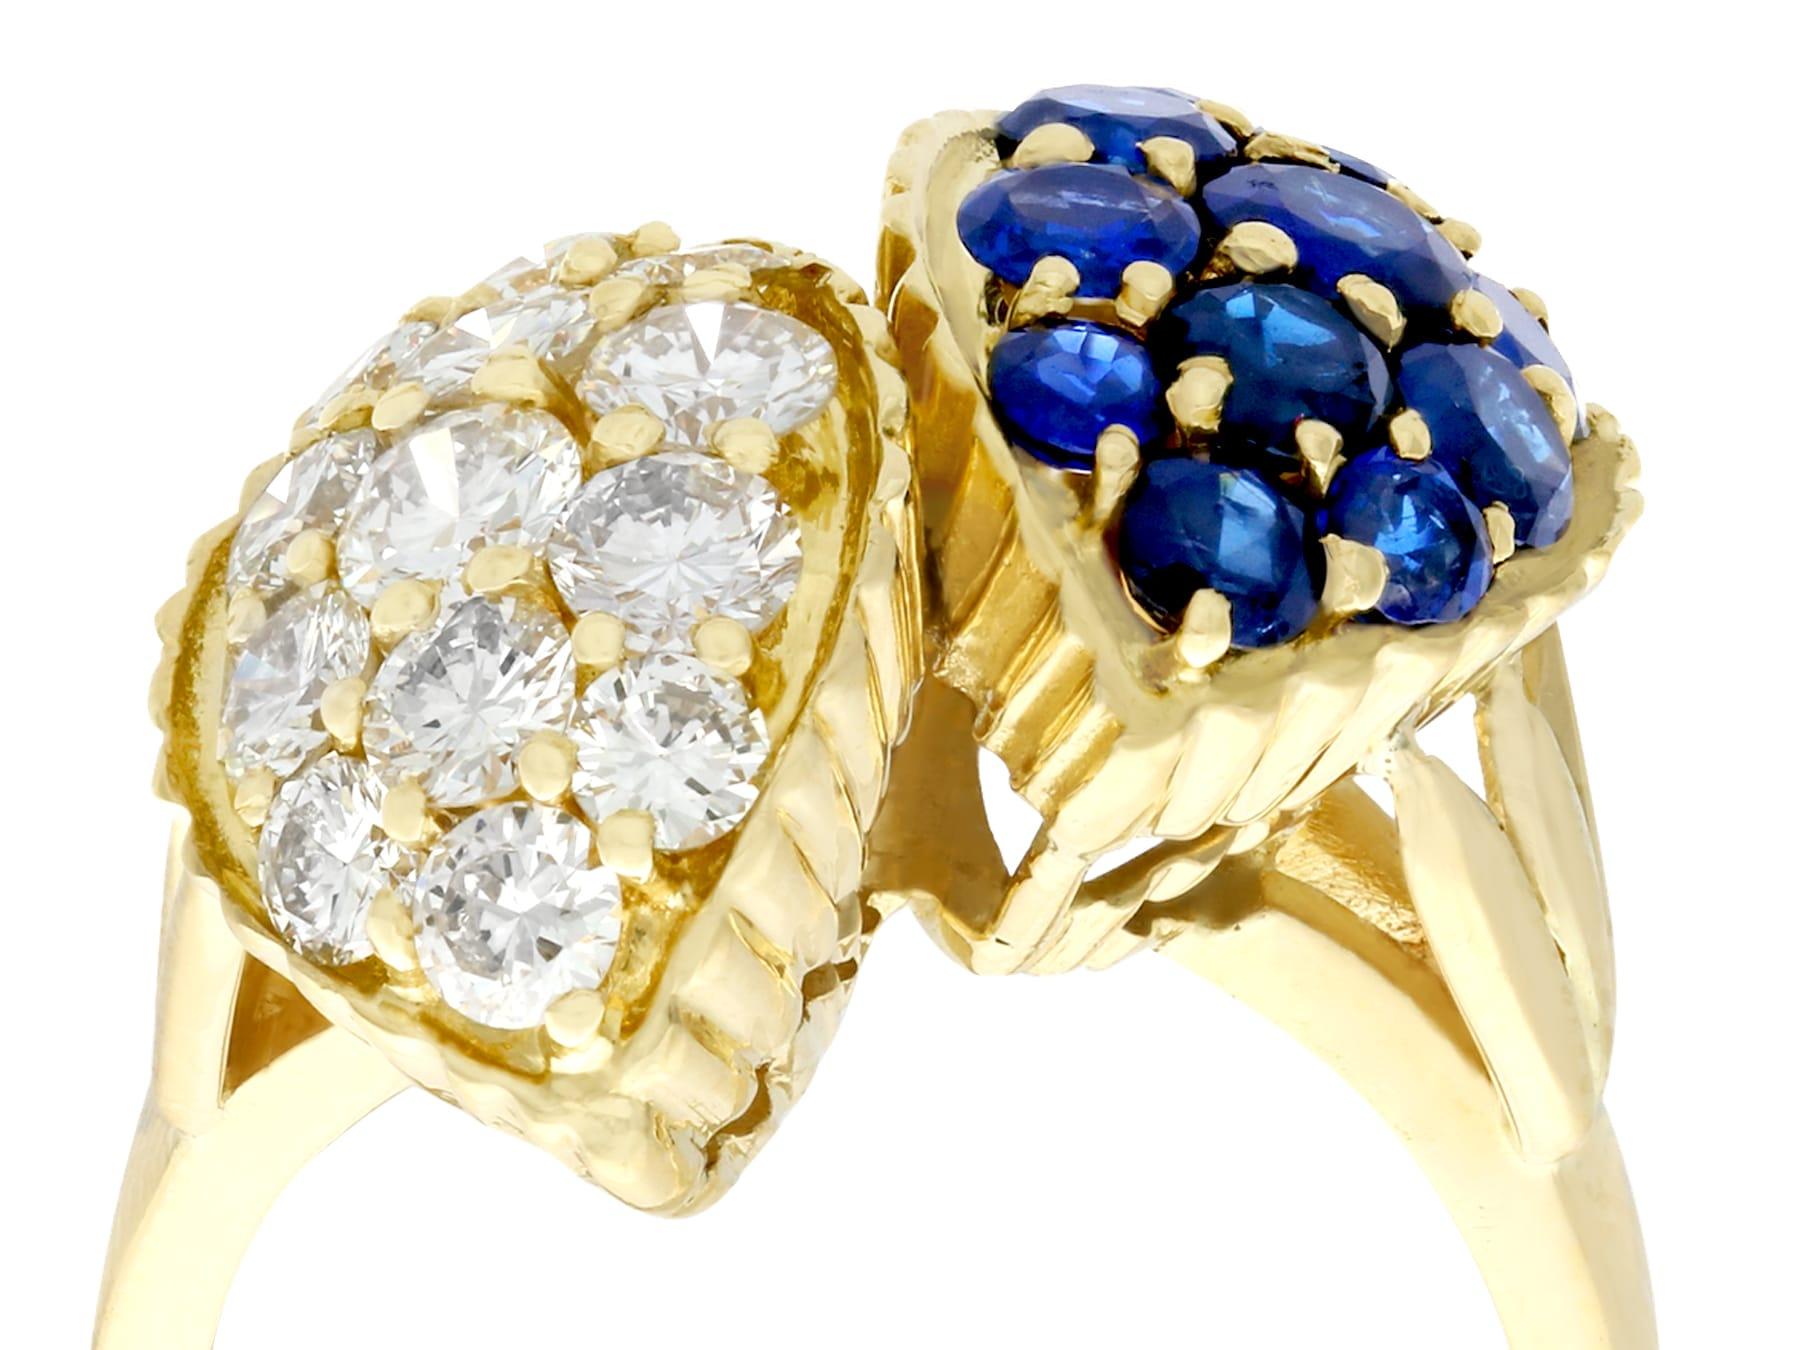 A stunning vintage 1.96 carat diamond and 1.66 carat sapphire, 18 karat yellow gold dress ring; part of our diverse vintage jewelry and estate jewelry collections

This stunning vintage sapphire and diamond ring has been crafted in 18k yellow